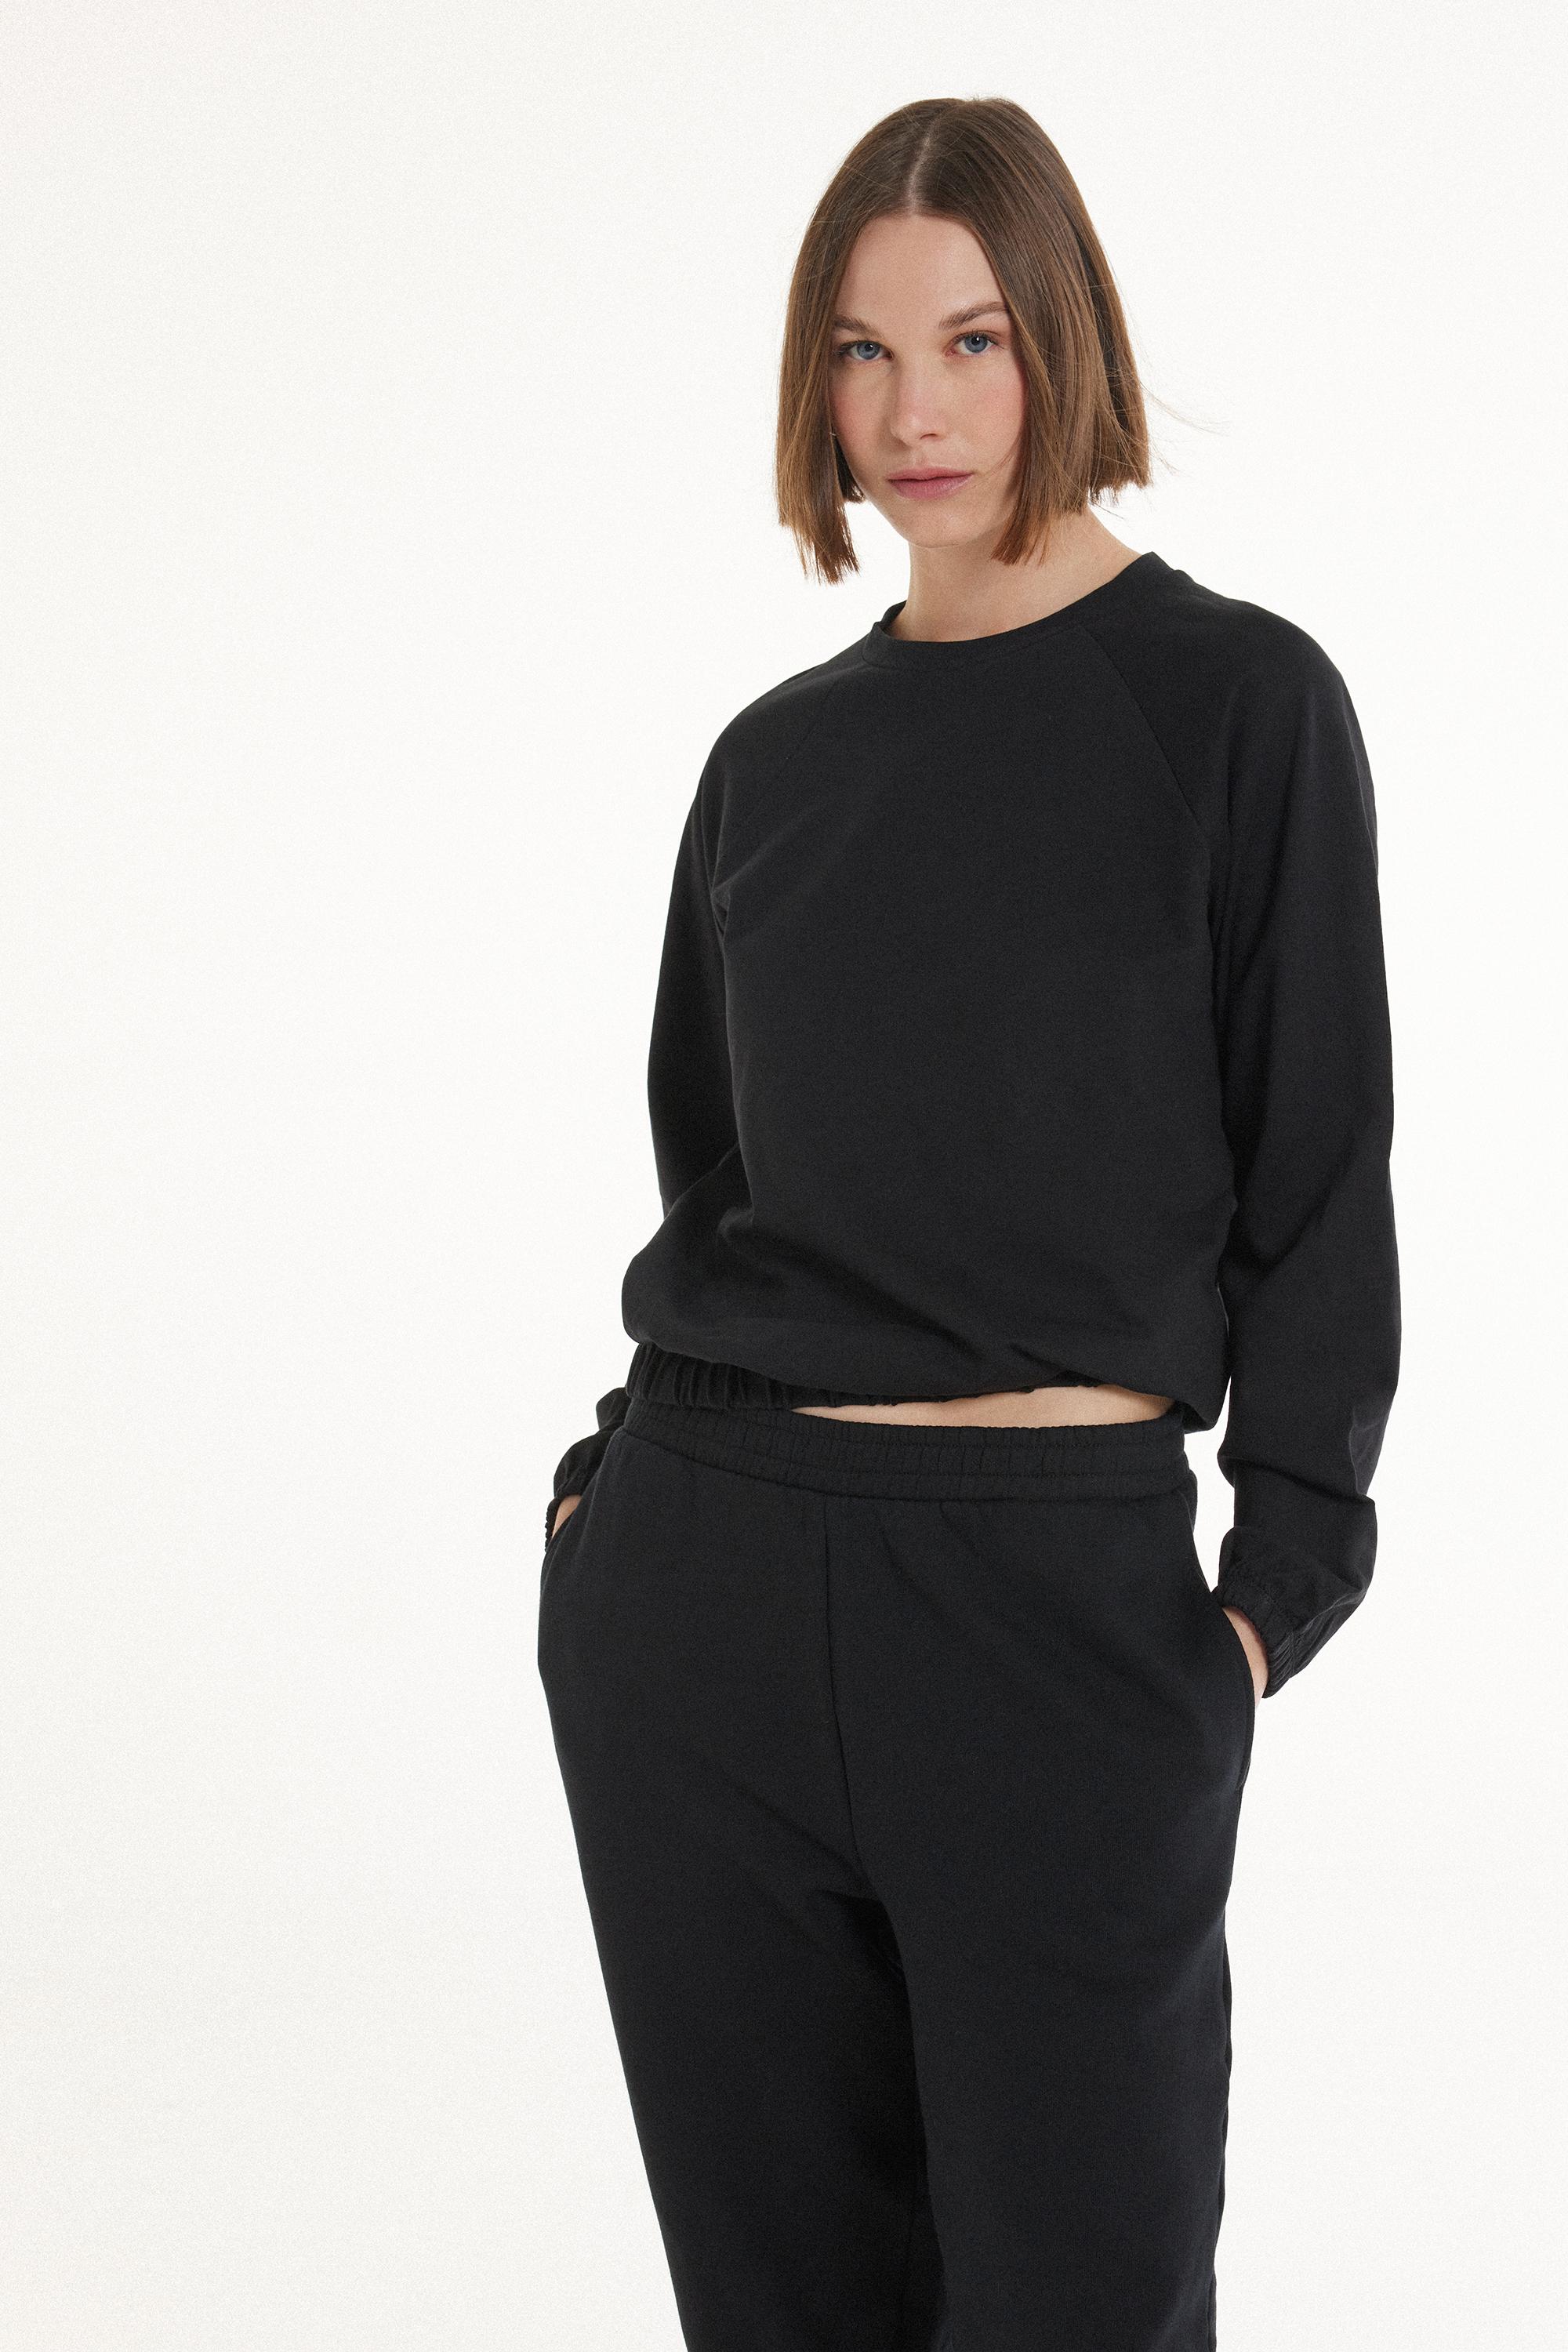 Long-Sleeved Crew-Neck Knit Top with Cuffs